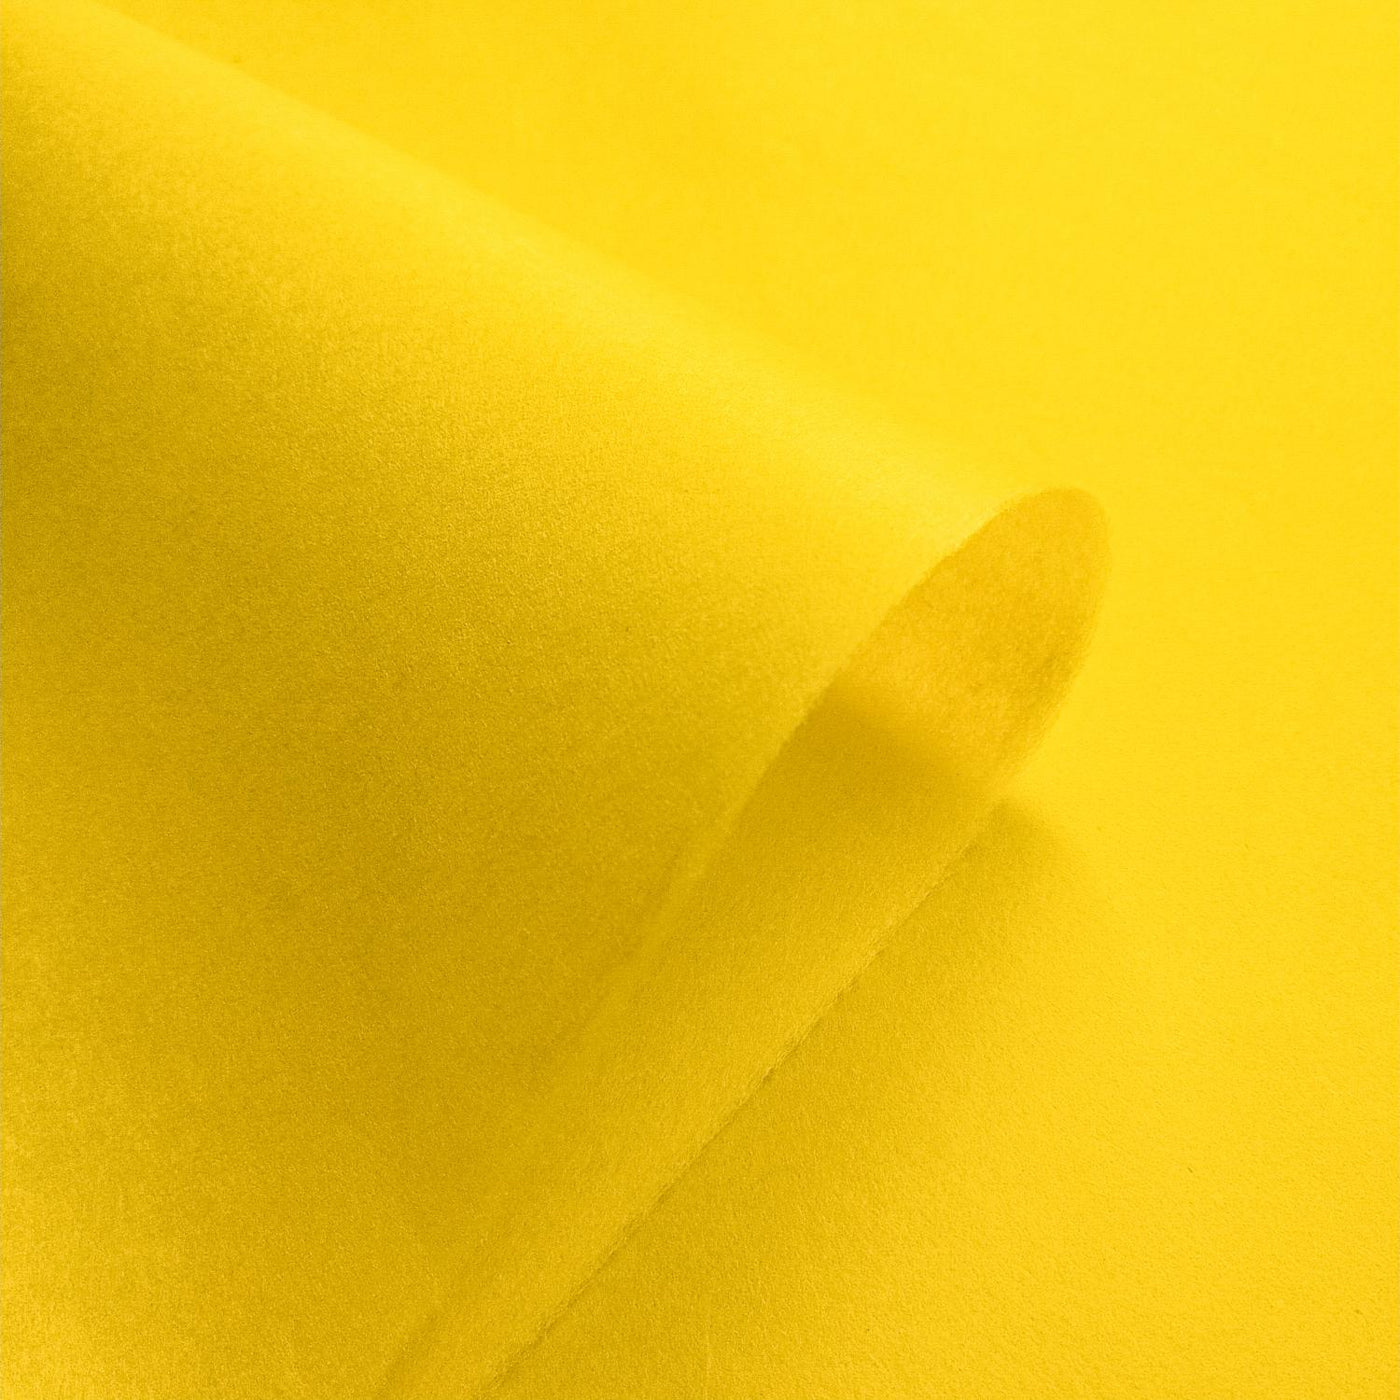 Solid-Colored Kozo Mulberry Paper (Canary Yellow)